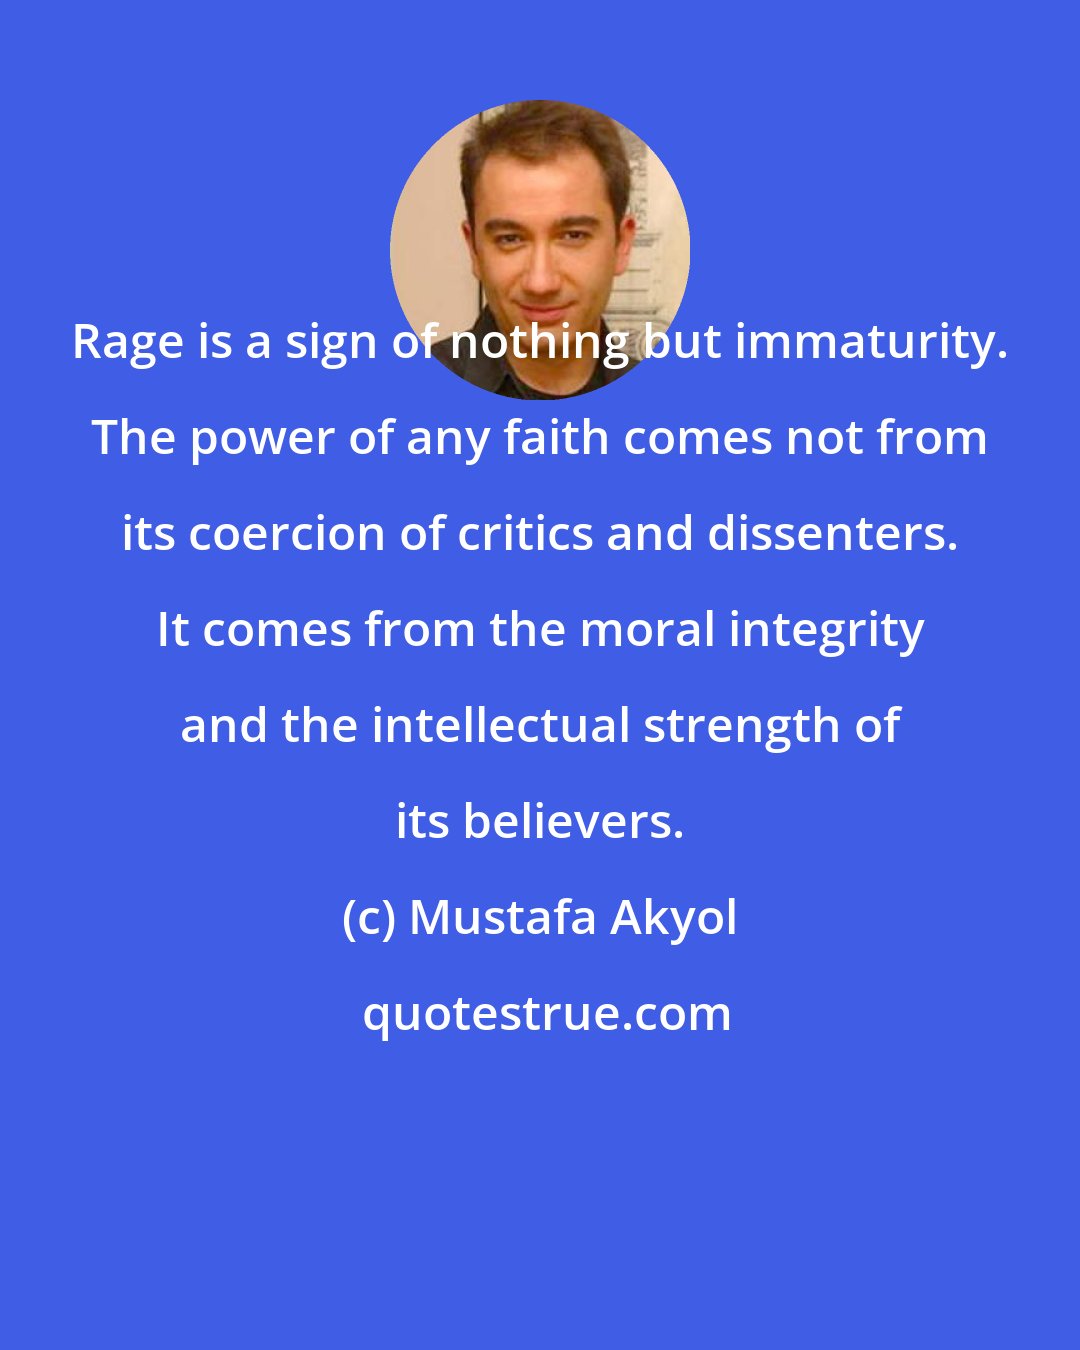 Mustafa Akyol: Rage is a sign of nothing but immaturity. The power of any faith comes not from its coercion of critics and dissenters. It comes from the moral integrity and the intellectual strength of its believers.